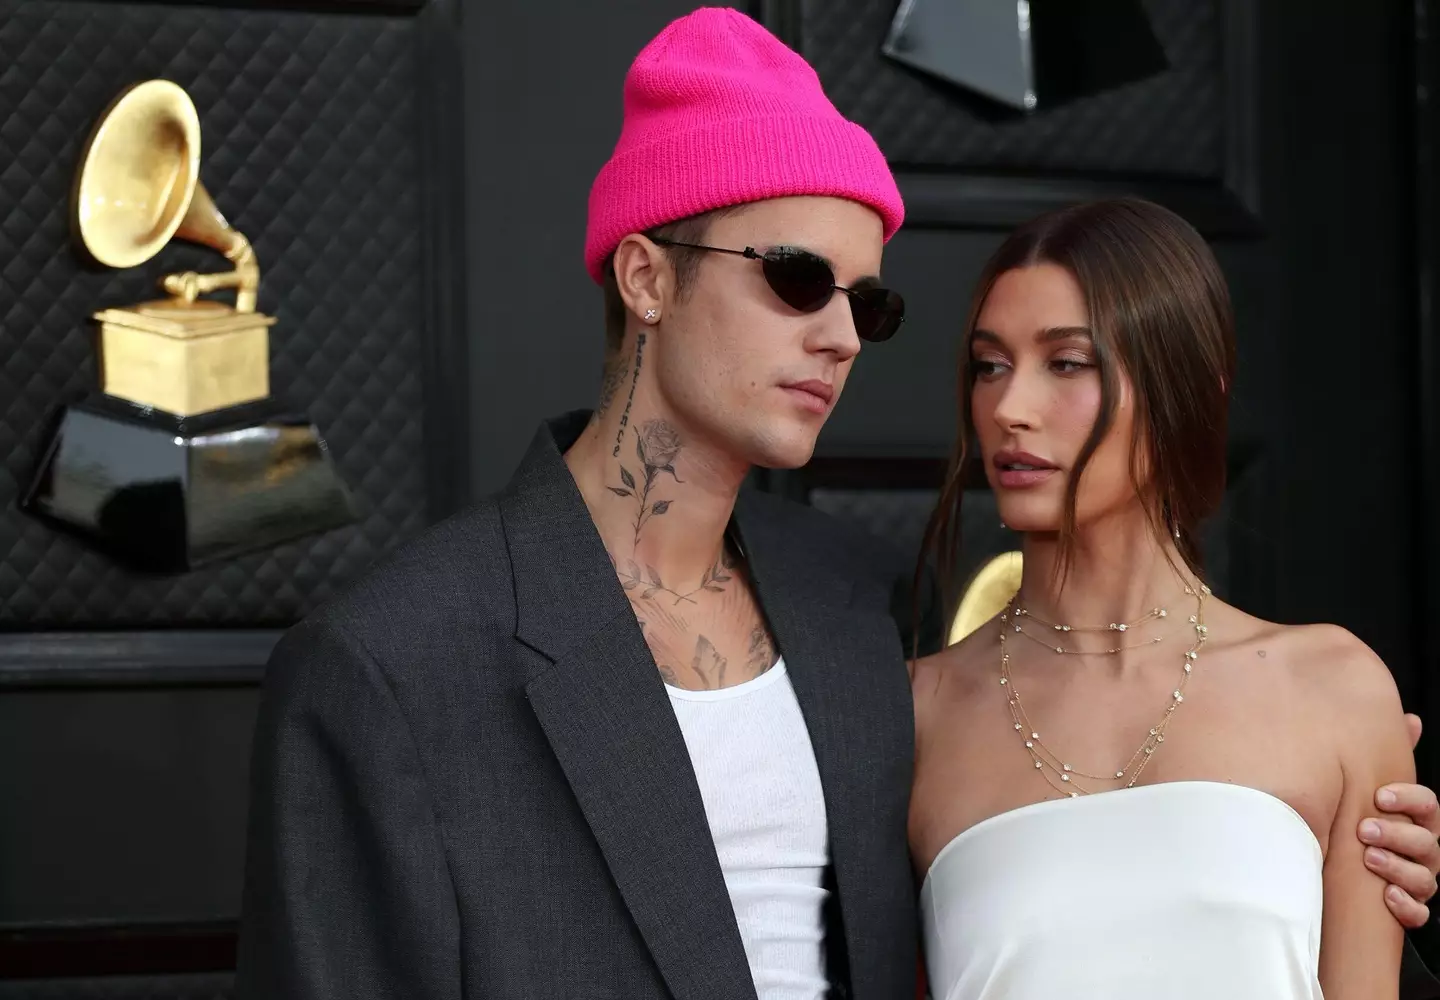 Justin and Hailey married in 2018, though the official ceremony wasn't until a year later.